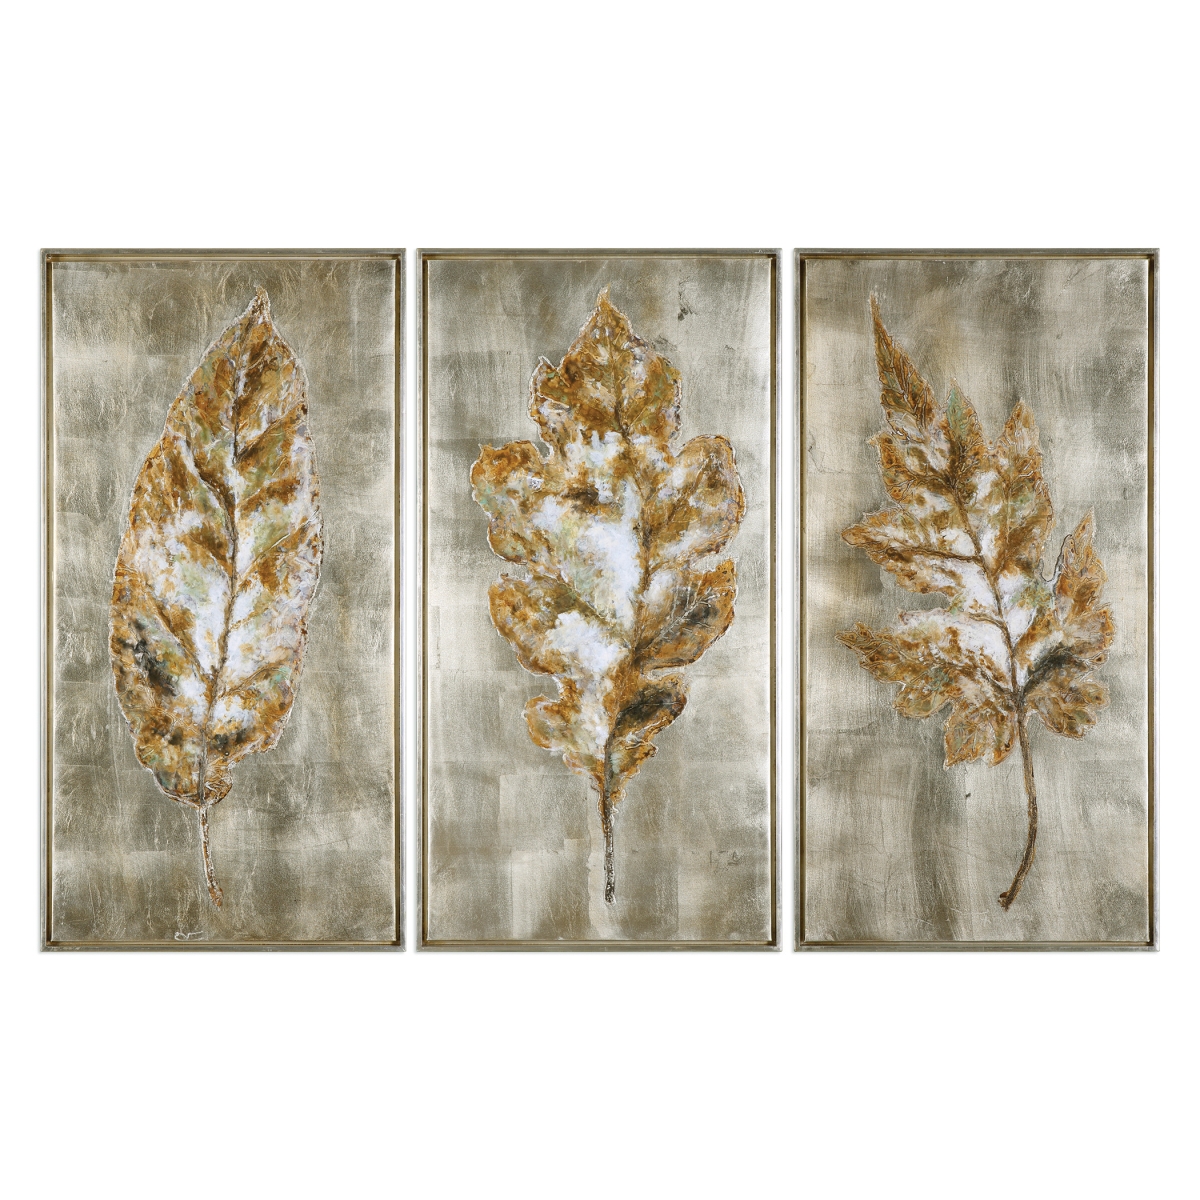 Picture of 212 Main 35334 Champagne Leaves Modern Art  Set of 3